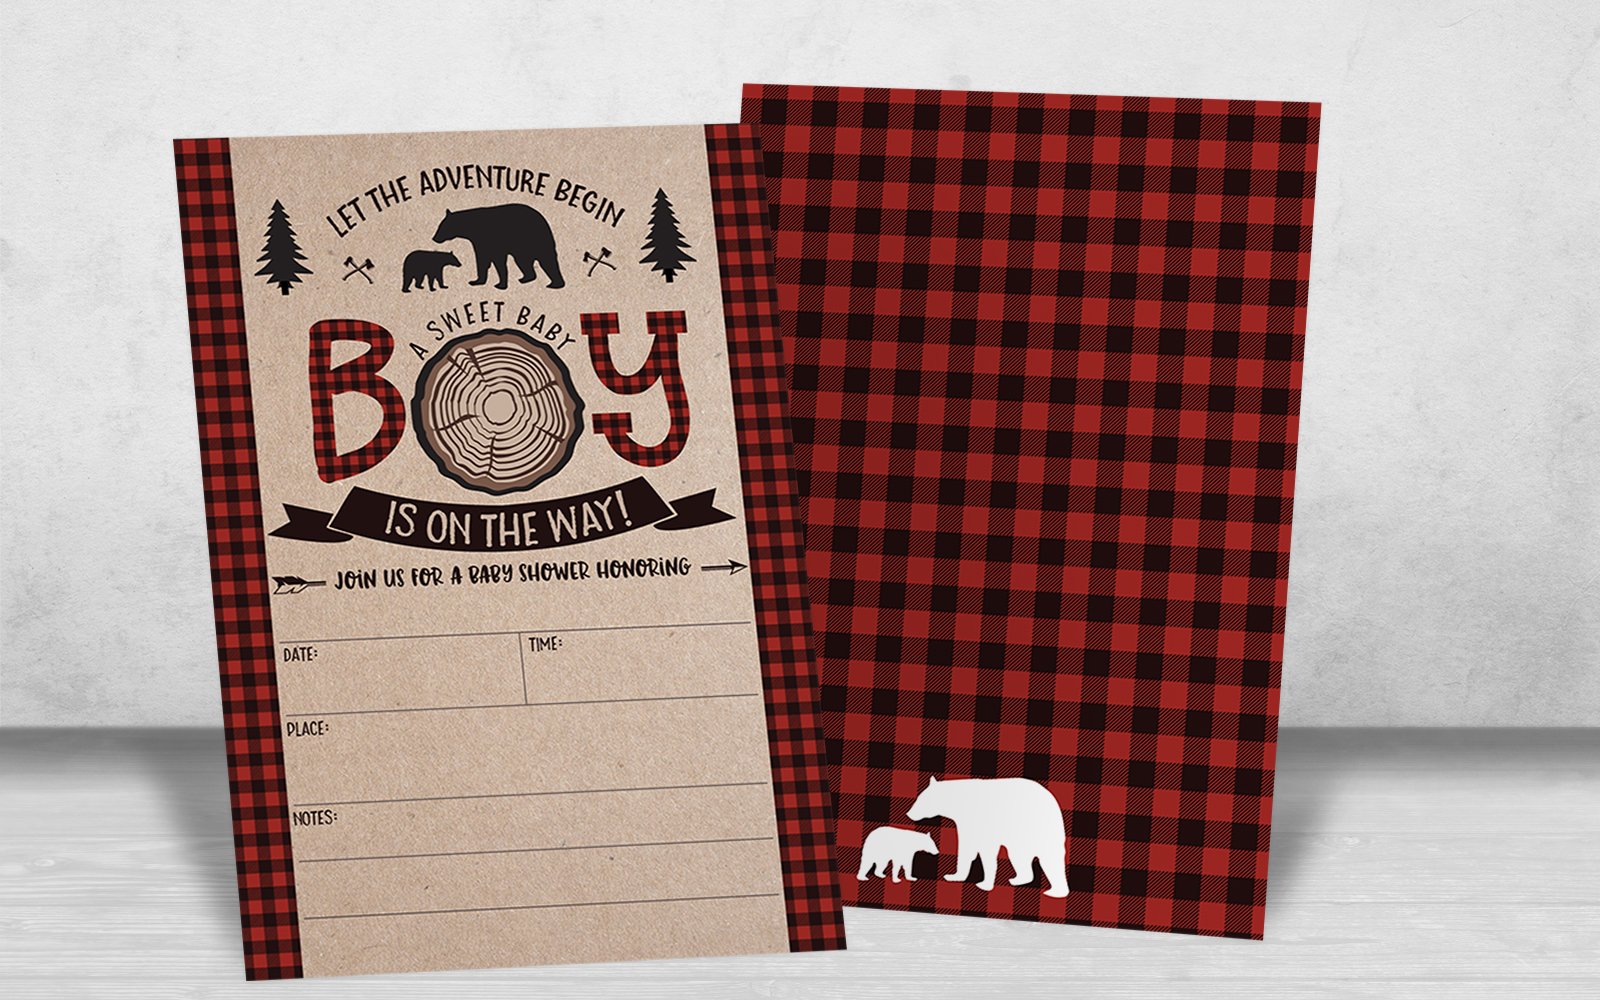 Your Main Event Prints Lumberjack Baby Shower Invitations, Boy Baby Shower Invitations, Mama Bear Baby Shower Invites, Woodland Baby Shower Invitations,, 20 Fill in Invitations and Envelopes